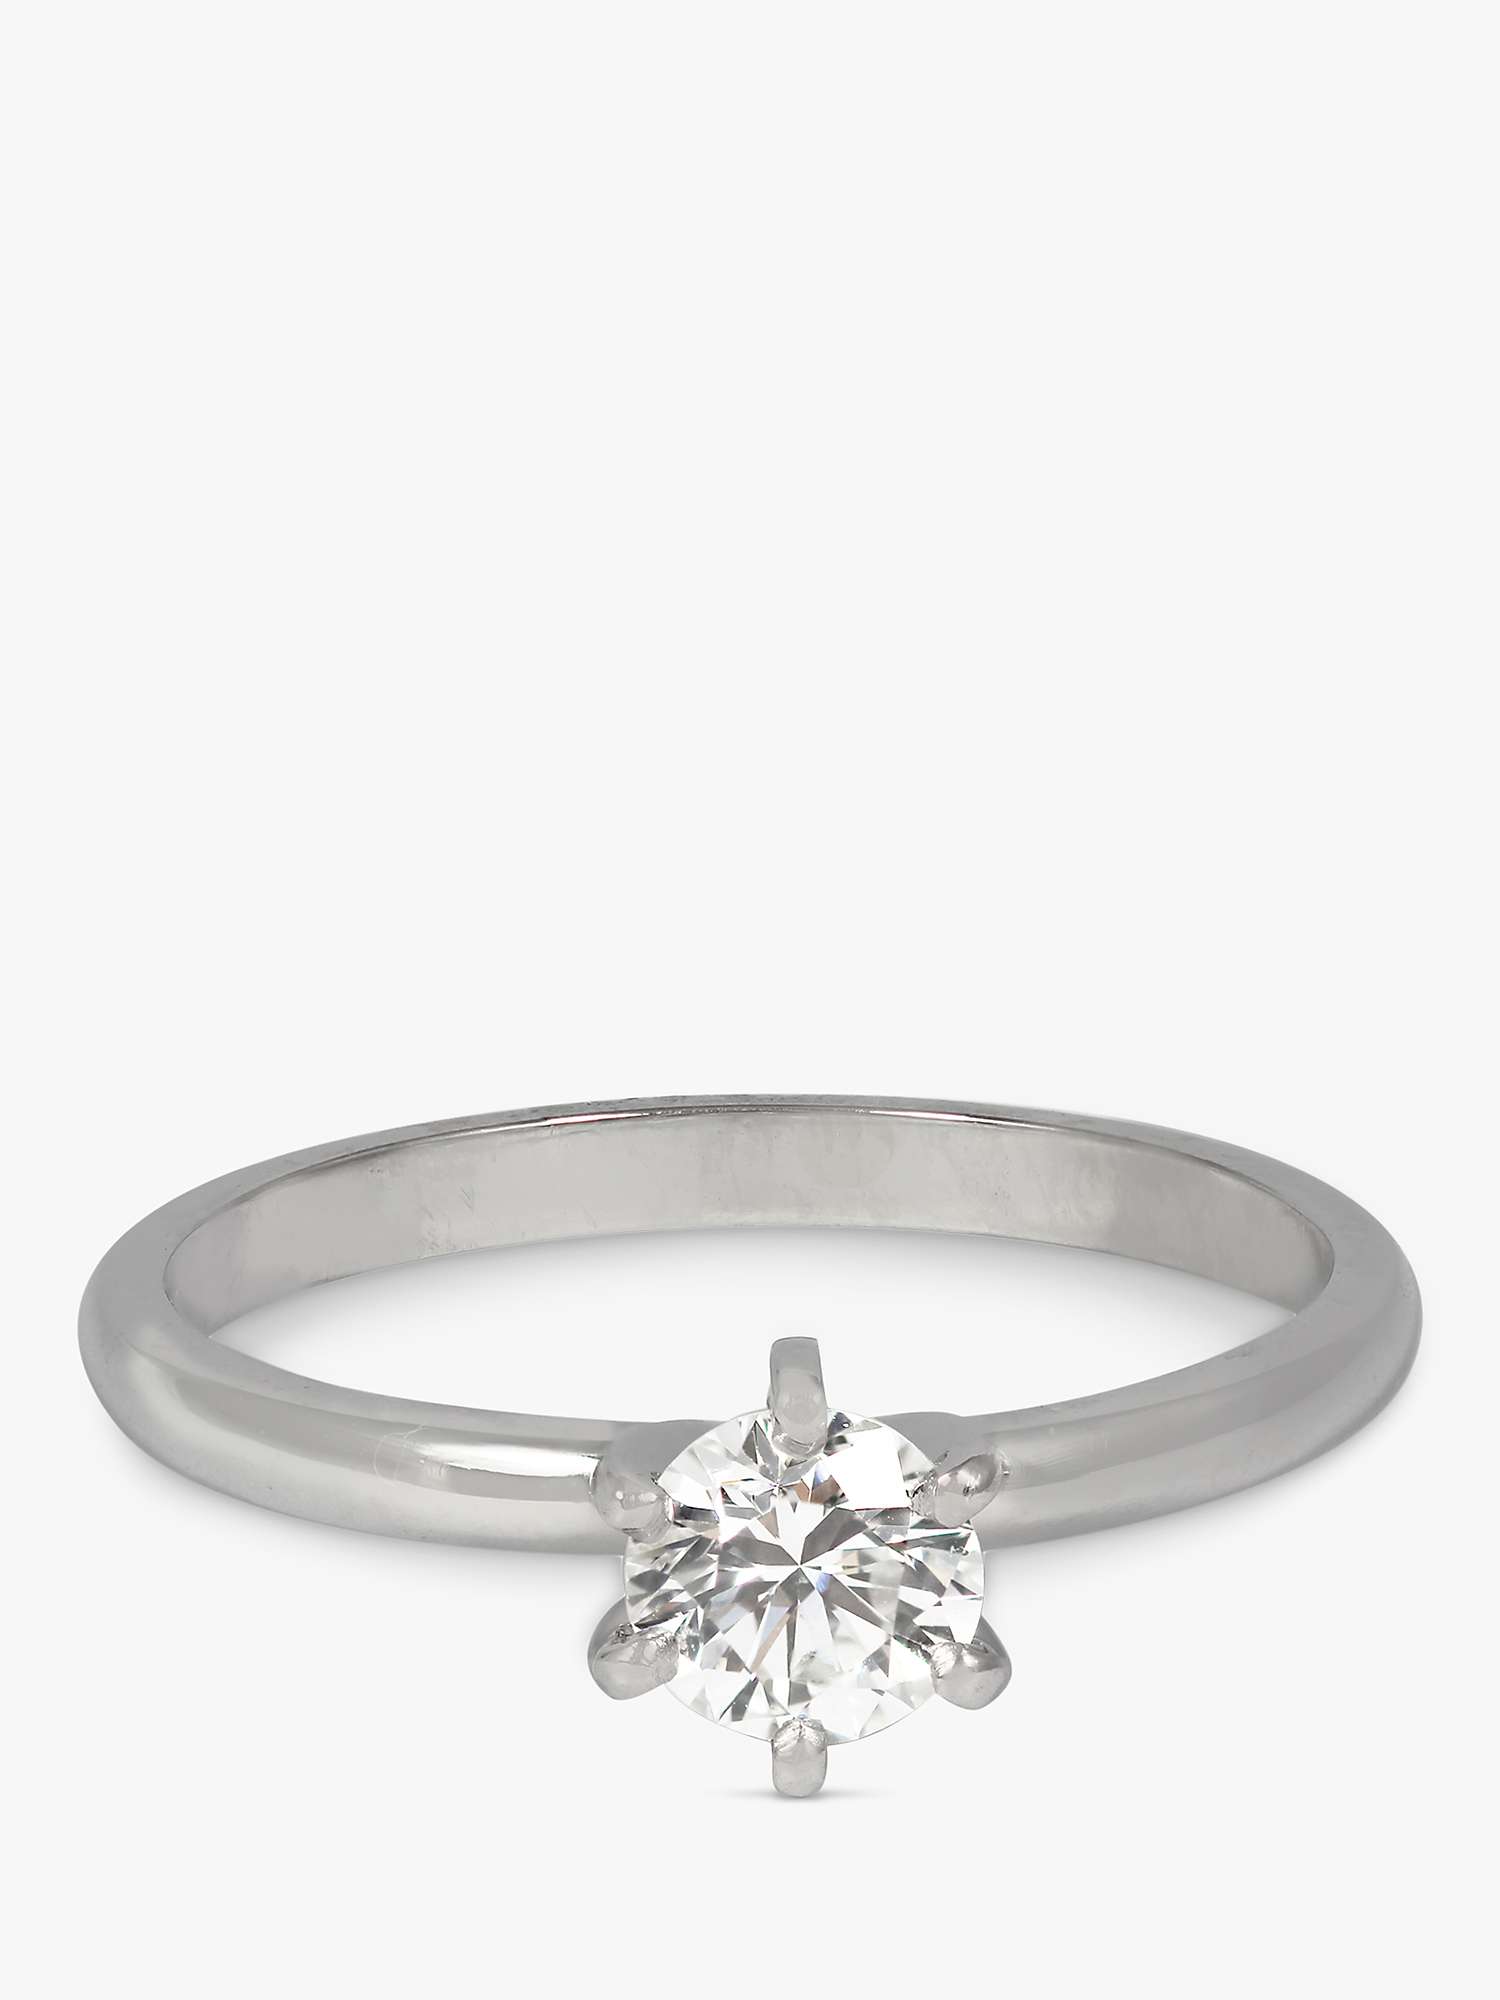 Buy Kojis 14ct White Gold Solitaire Diamond Second Hand Ring, Dated 2000 Online at johnlewis.com